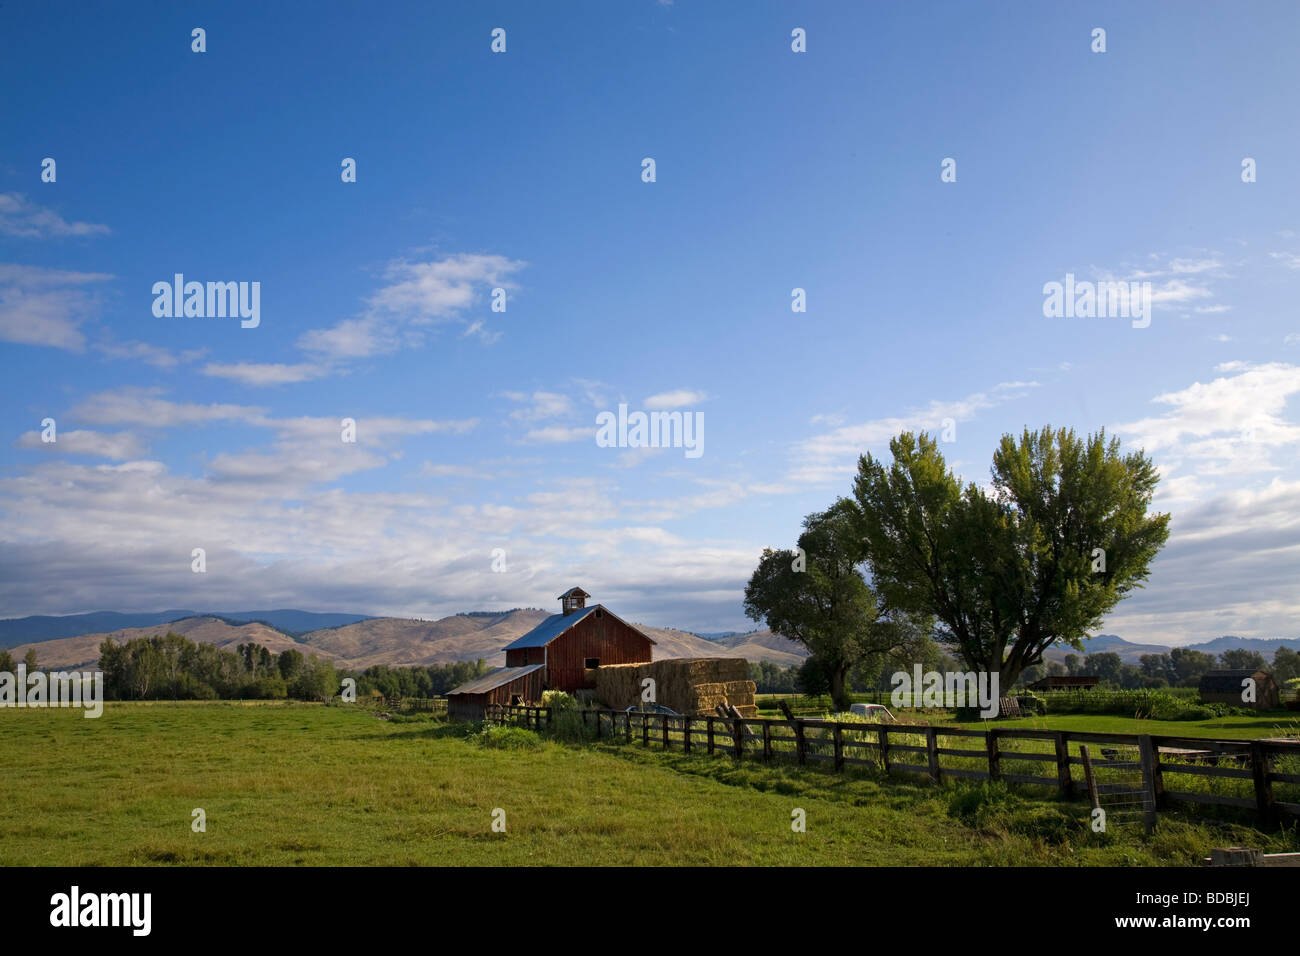 An old red barn and haystack on a ranch near Halfway Oregon on the slopes of the Wallowa Mountains in eastern Oregon Stock Photo